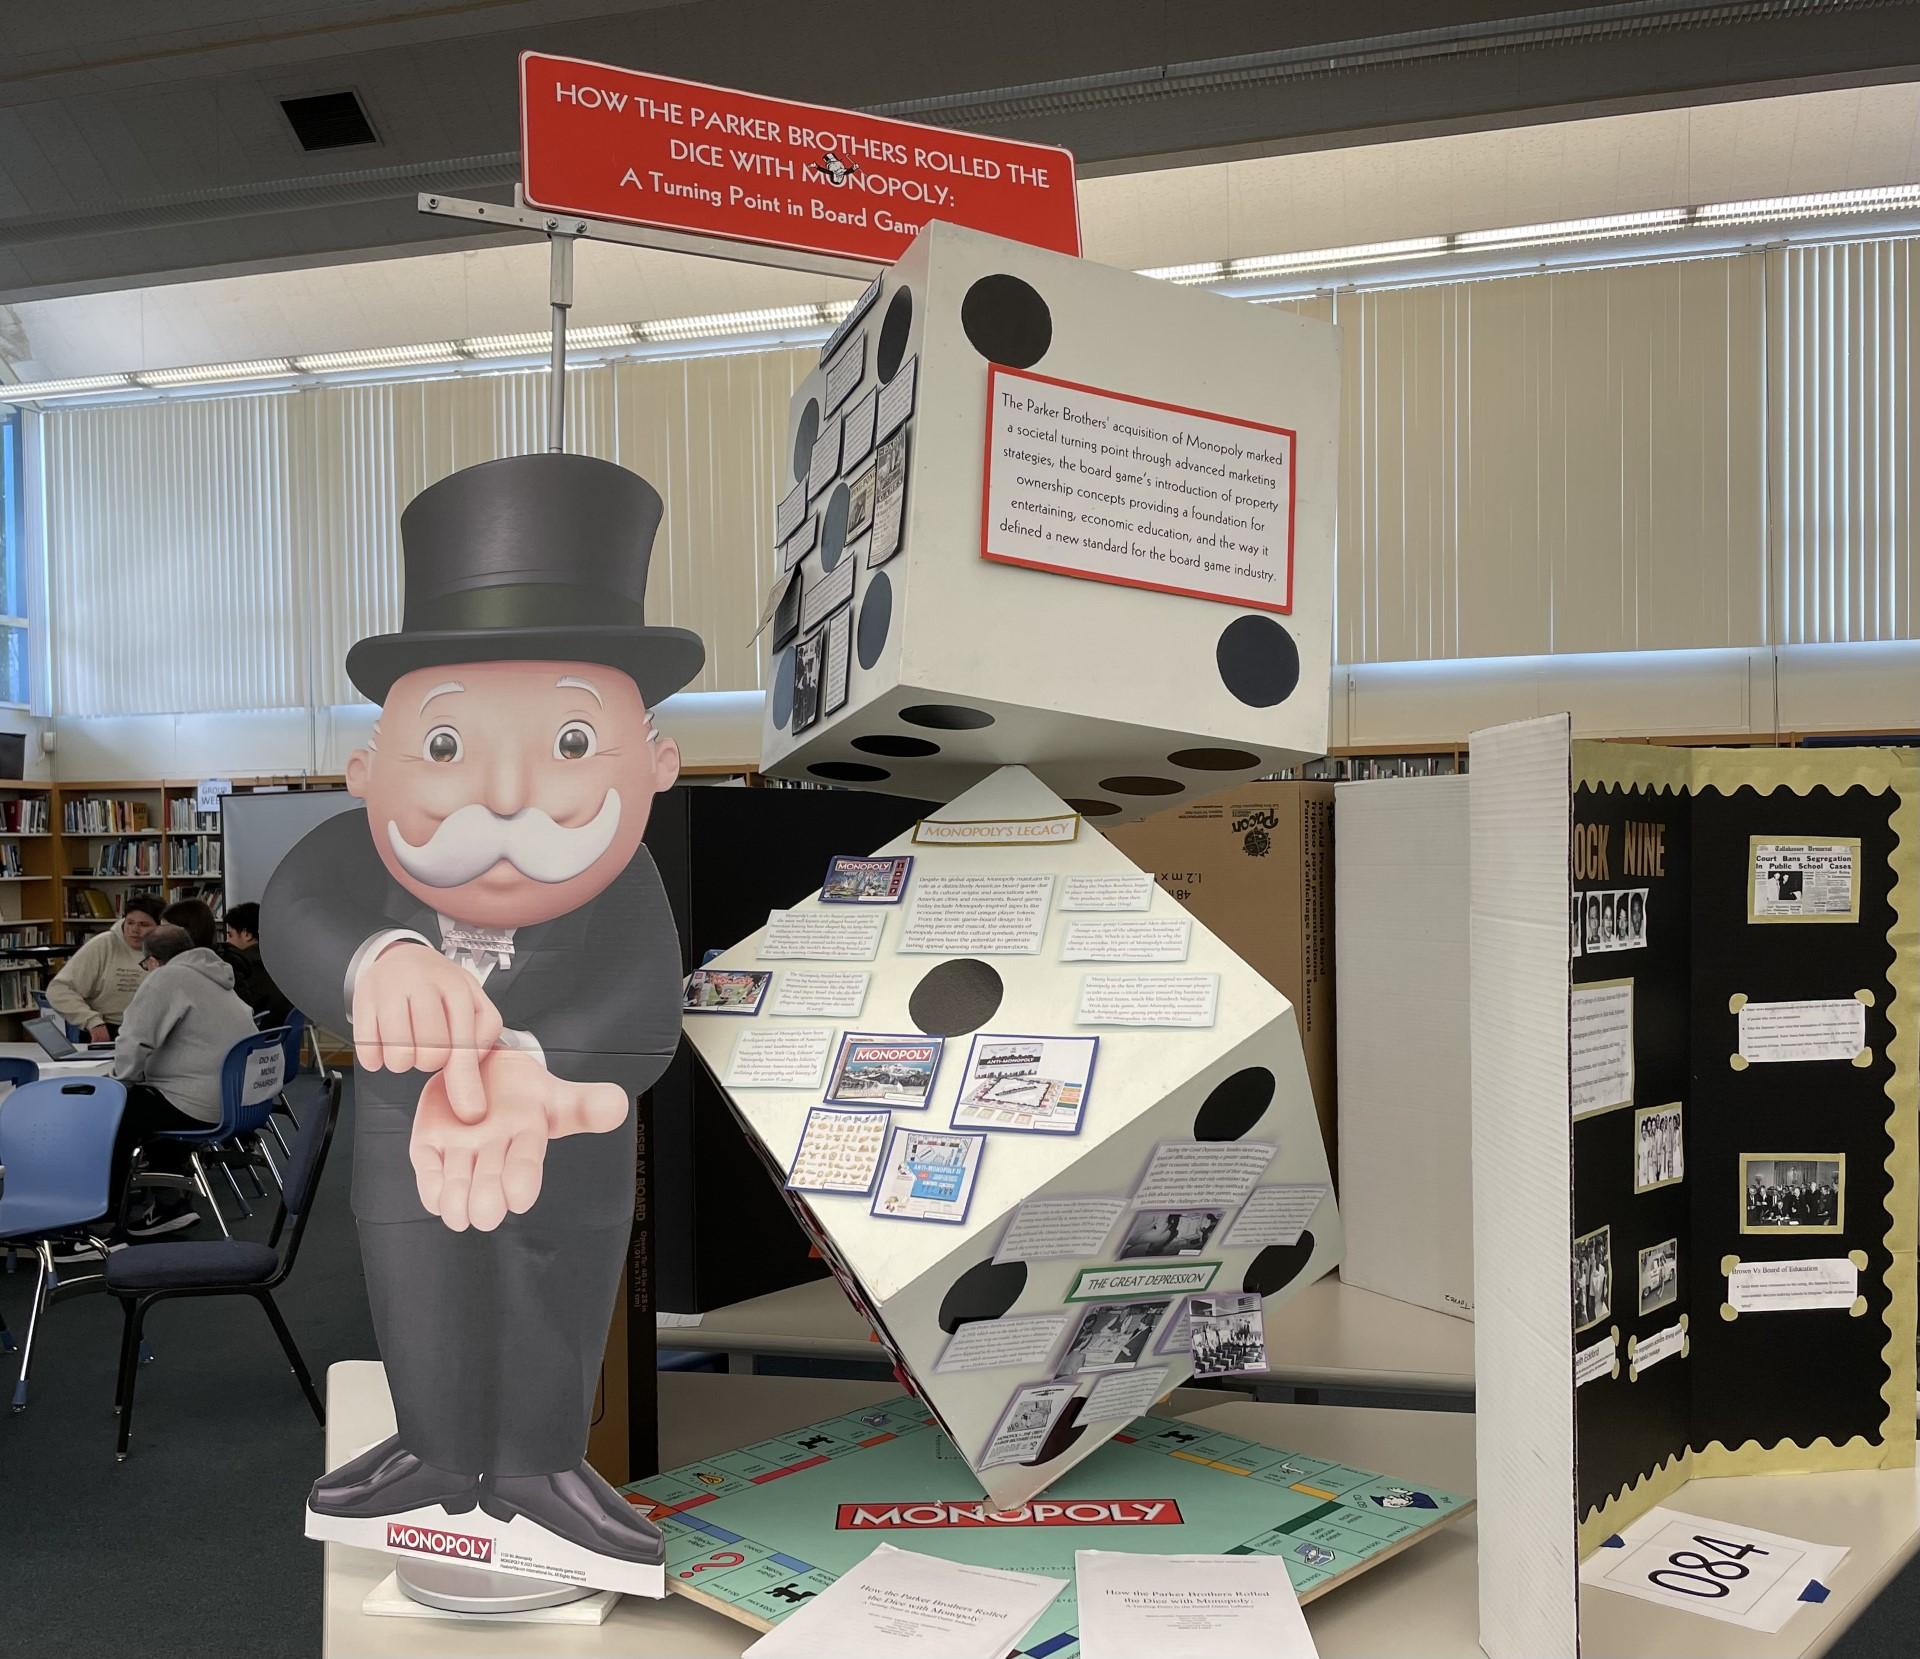 Group Exhibit: "How the Parker Brothers Rolled the Dice with Monopoly: A Turning Point in the Board Game Industry" by Josephine Harsana, Angeline Gloria and Sabrina Aquino